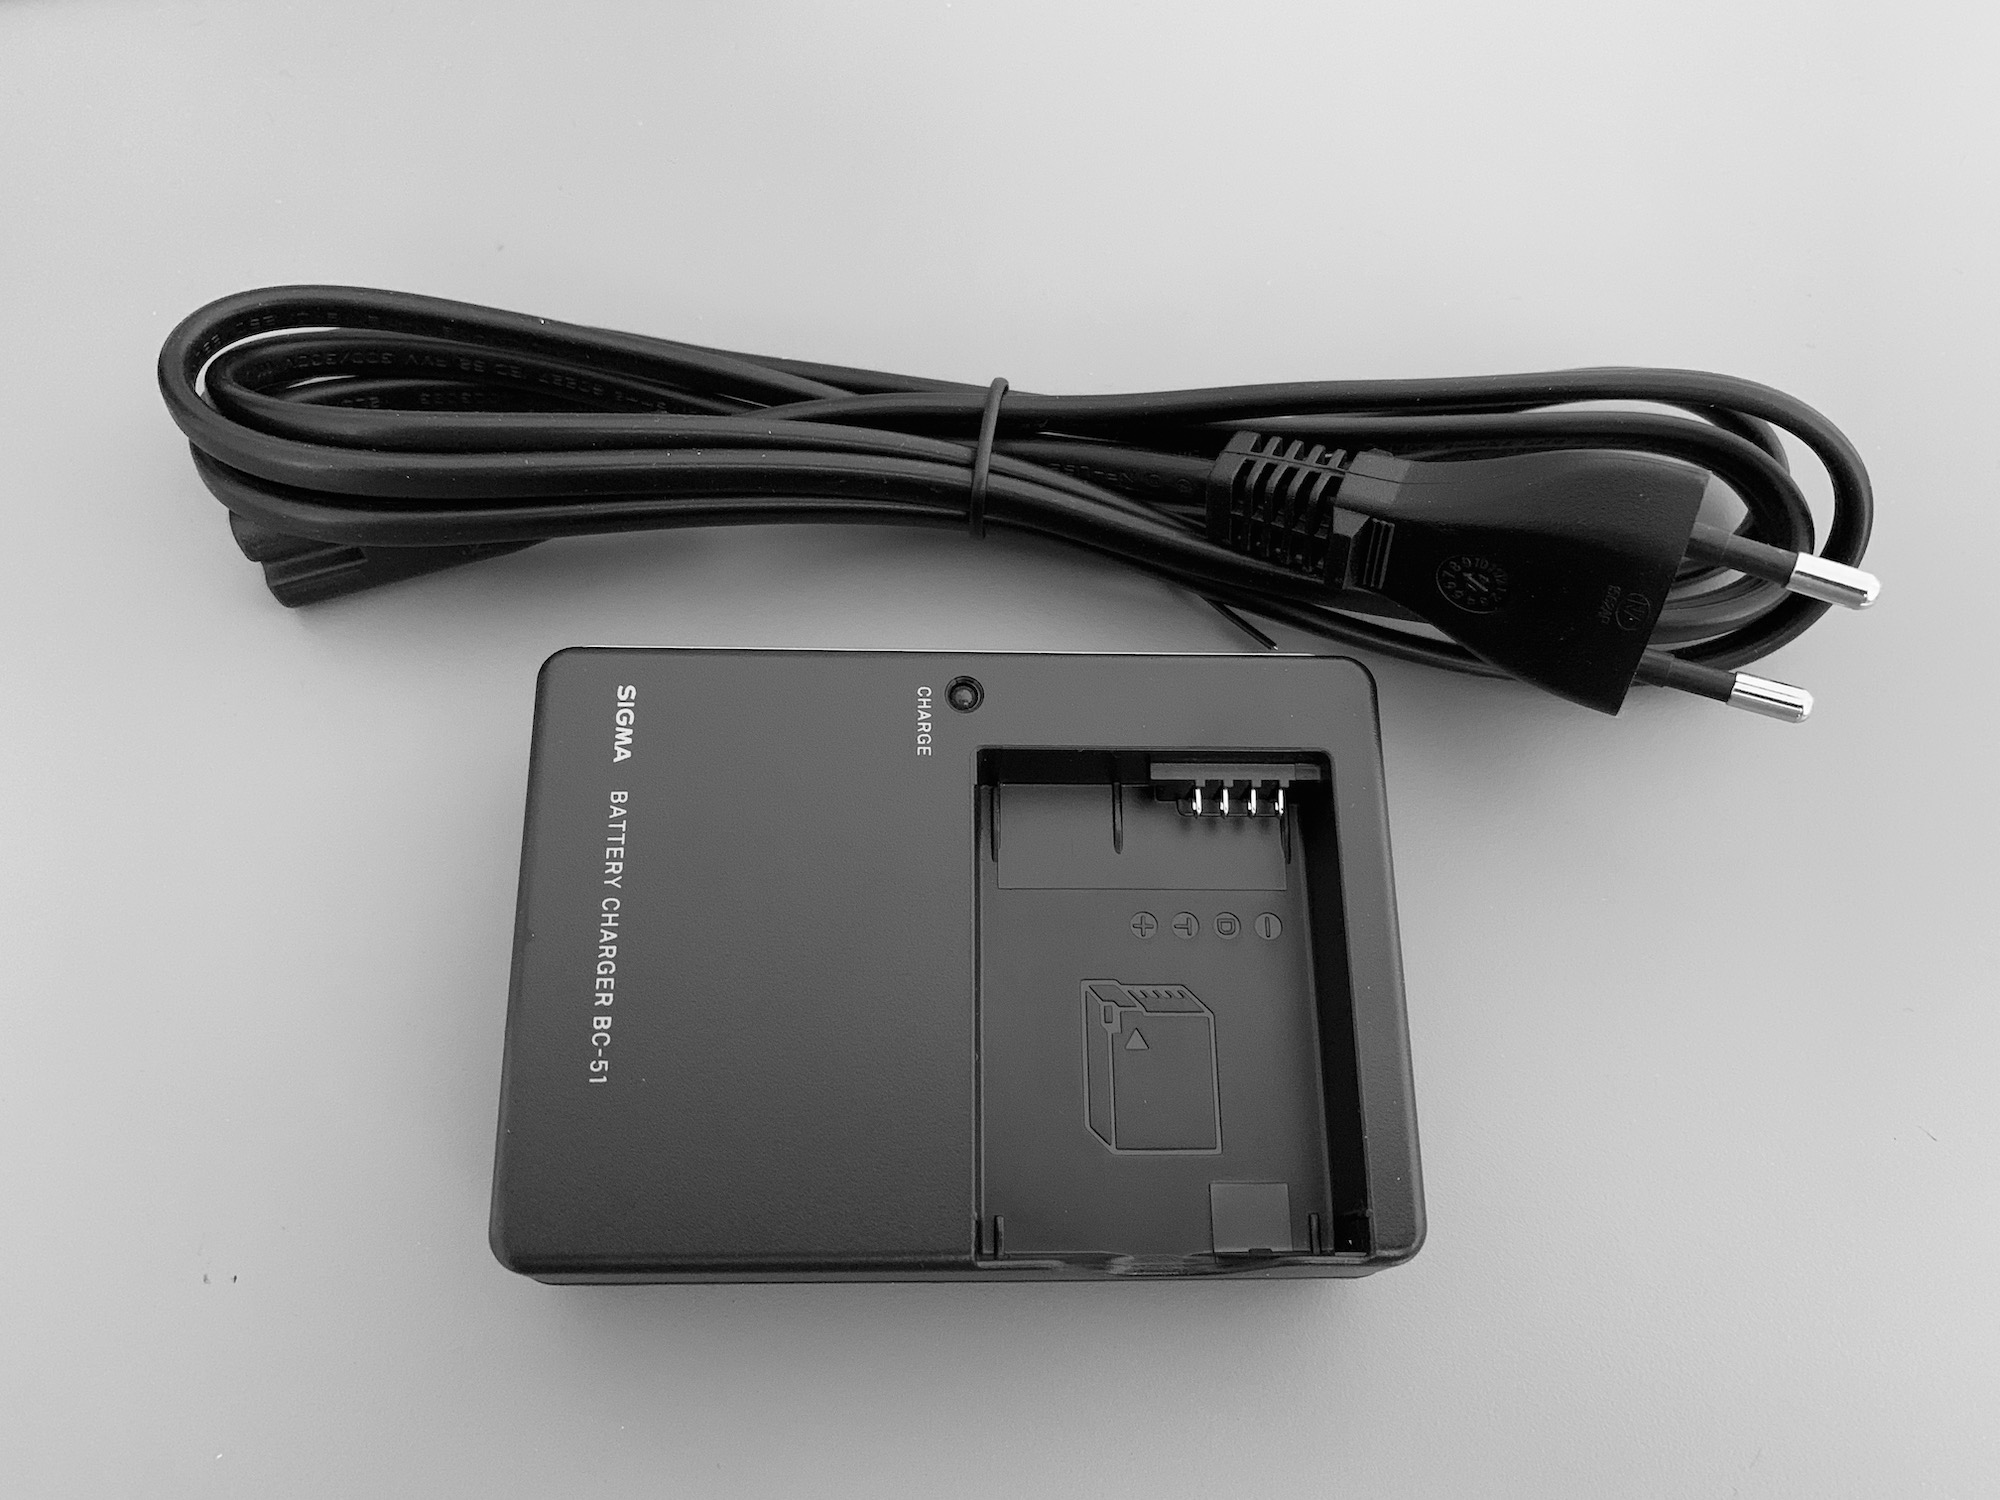 SIGMA BC-51 battery charger and its power cord with euro plug.